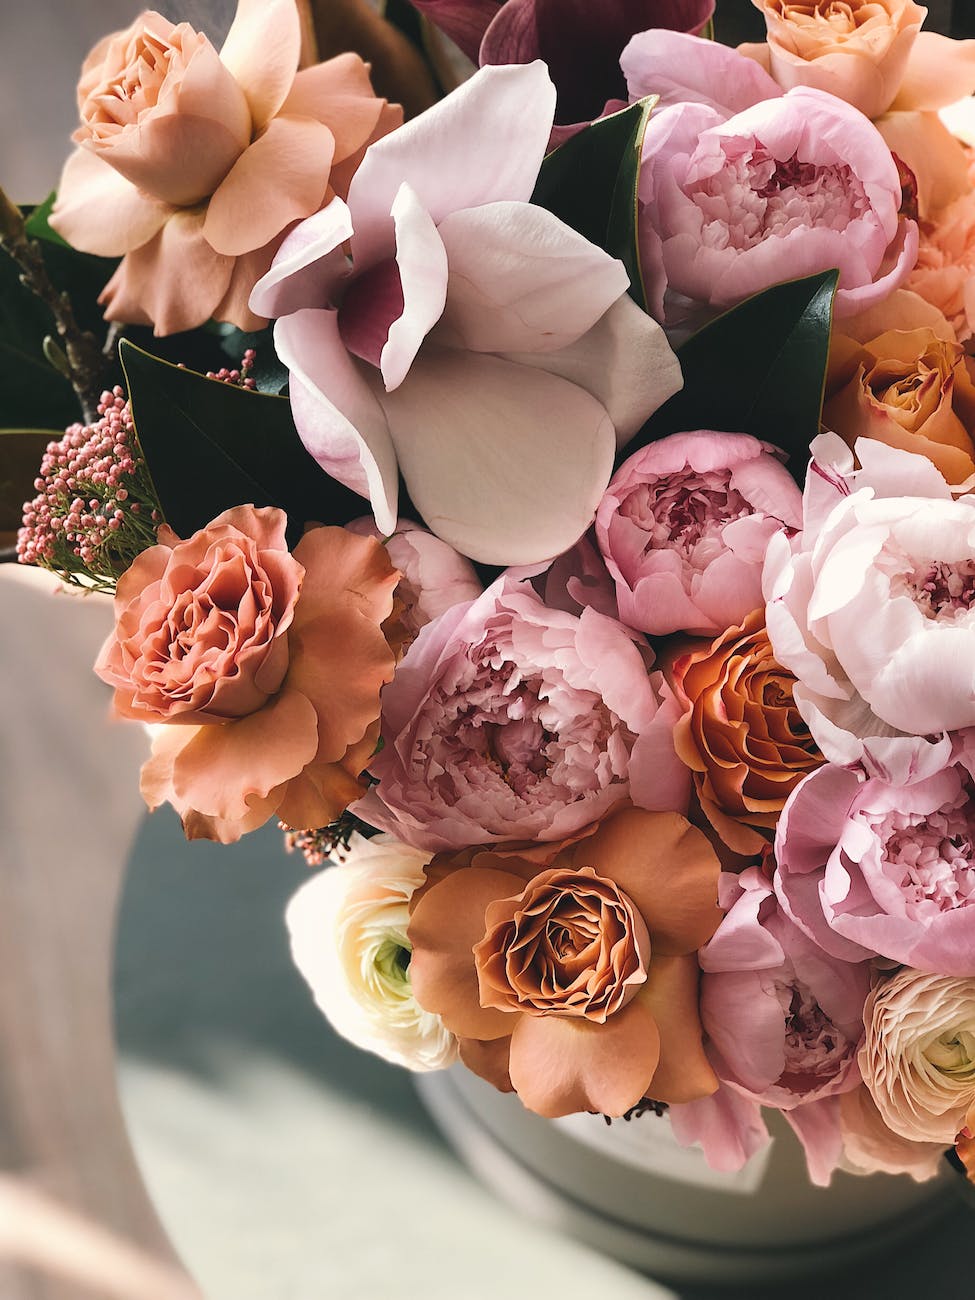 flowers as a push present